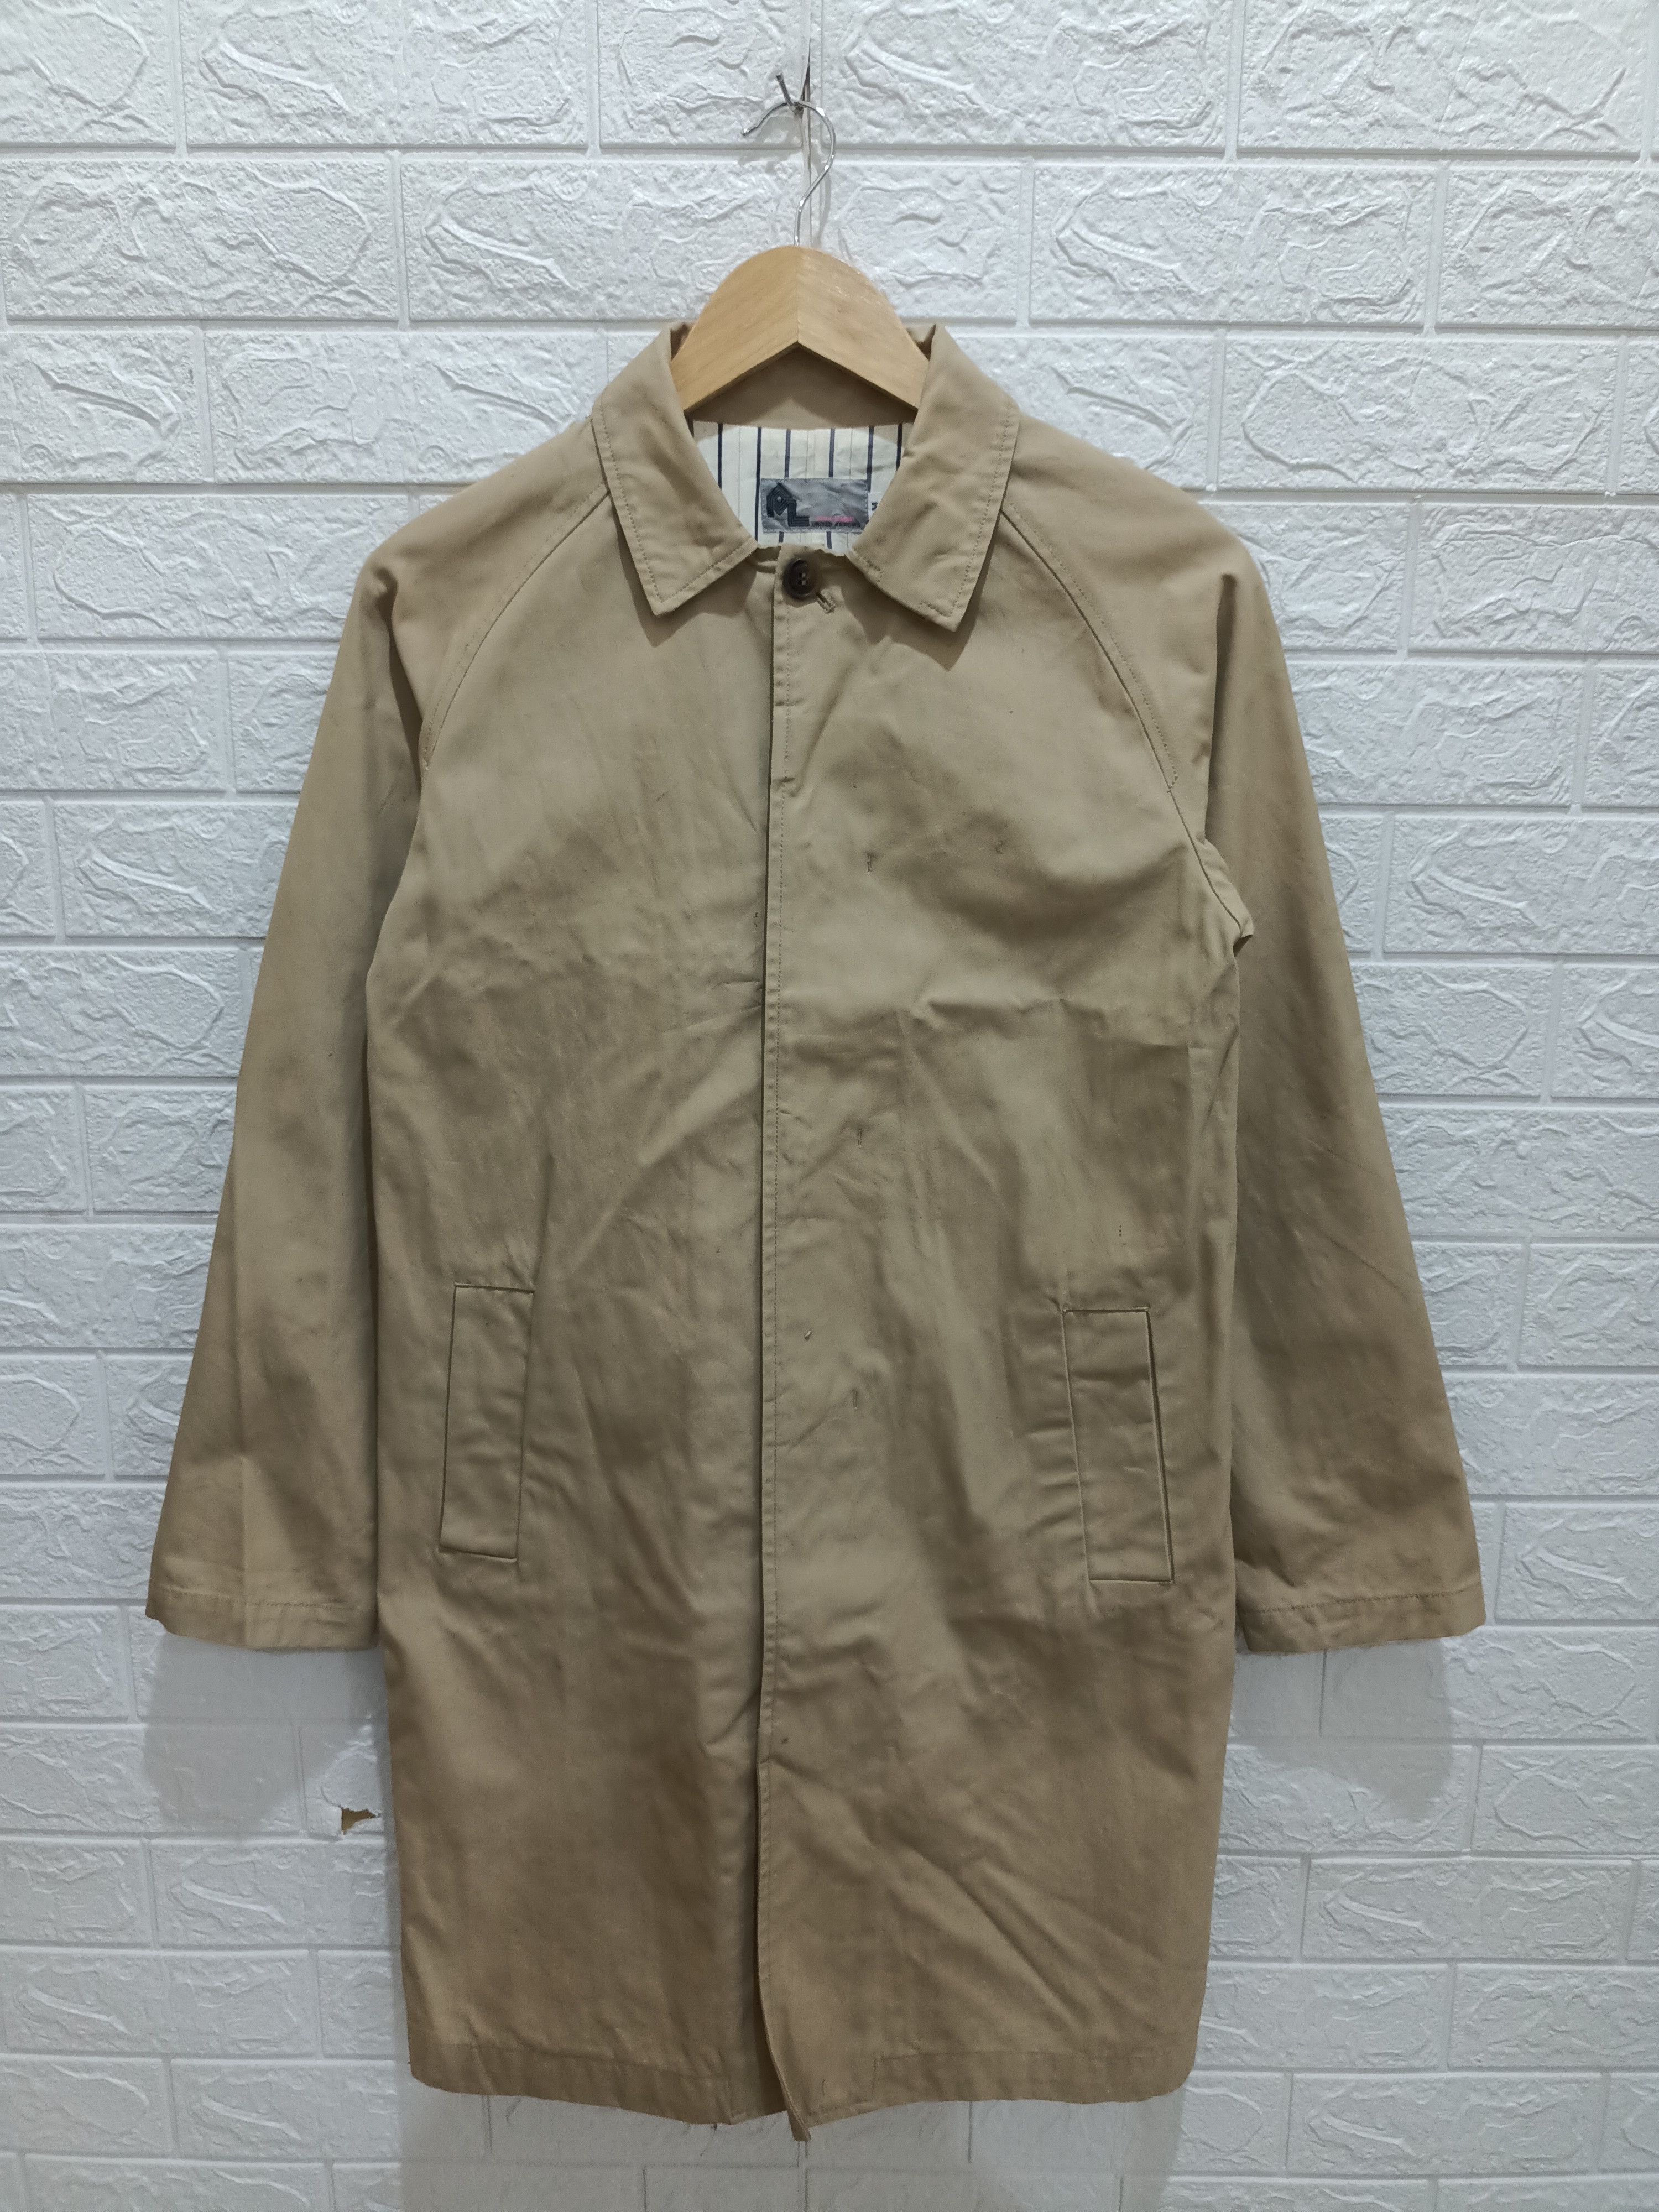 Archival Clothing - United Arrow Pink Label Made in Japan Trench Coats - 2